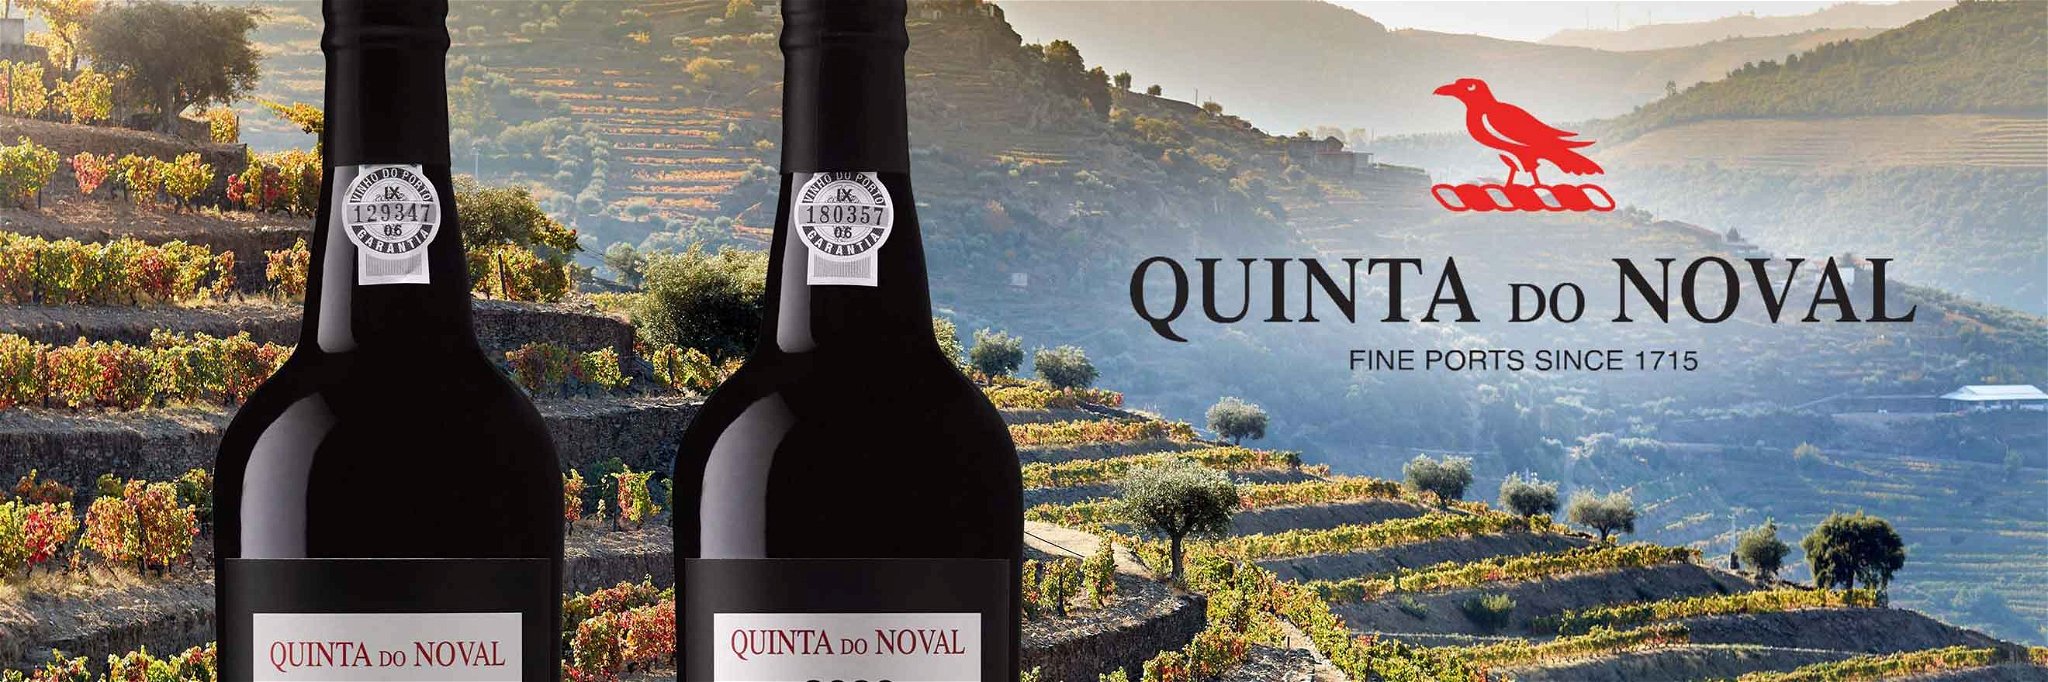 The two Vintage Ports declared by Quinta do Noval.